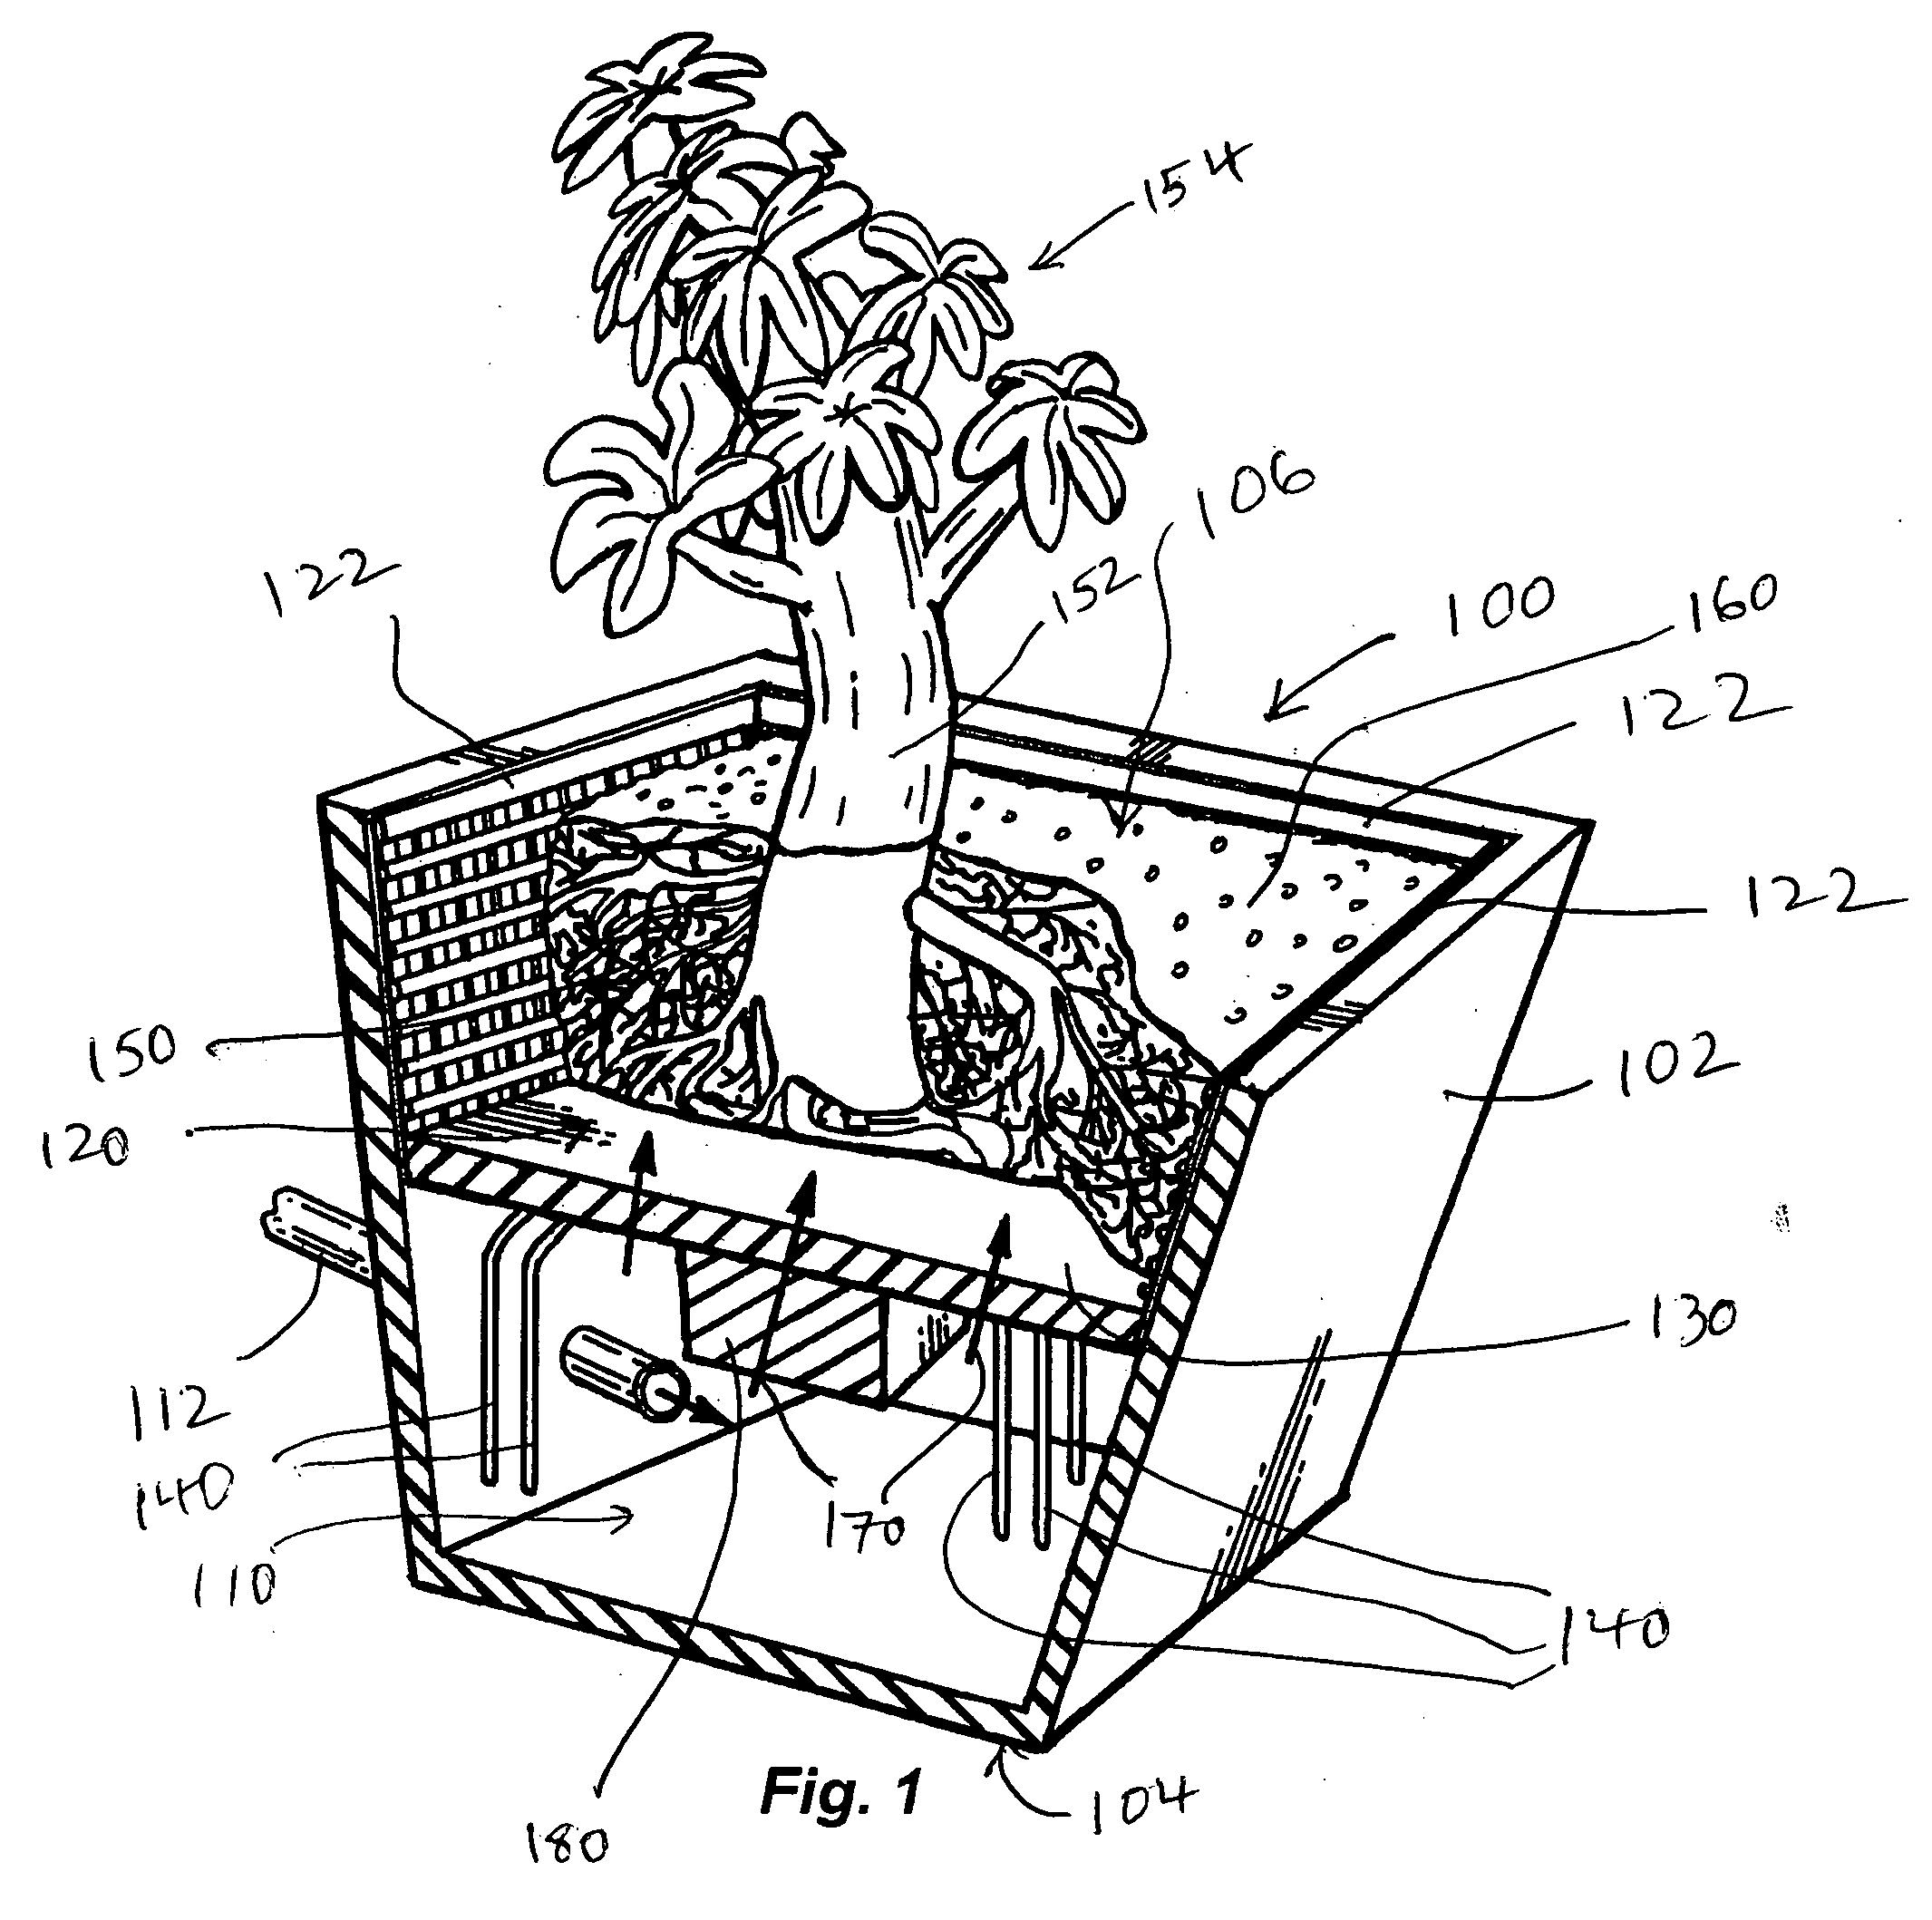 System and method for promoting growth of multiple root systems in a hydroponic environment